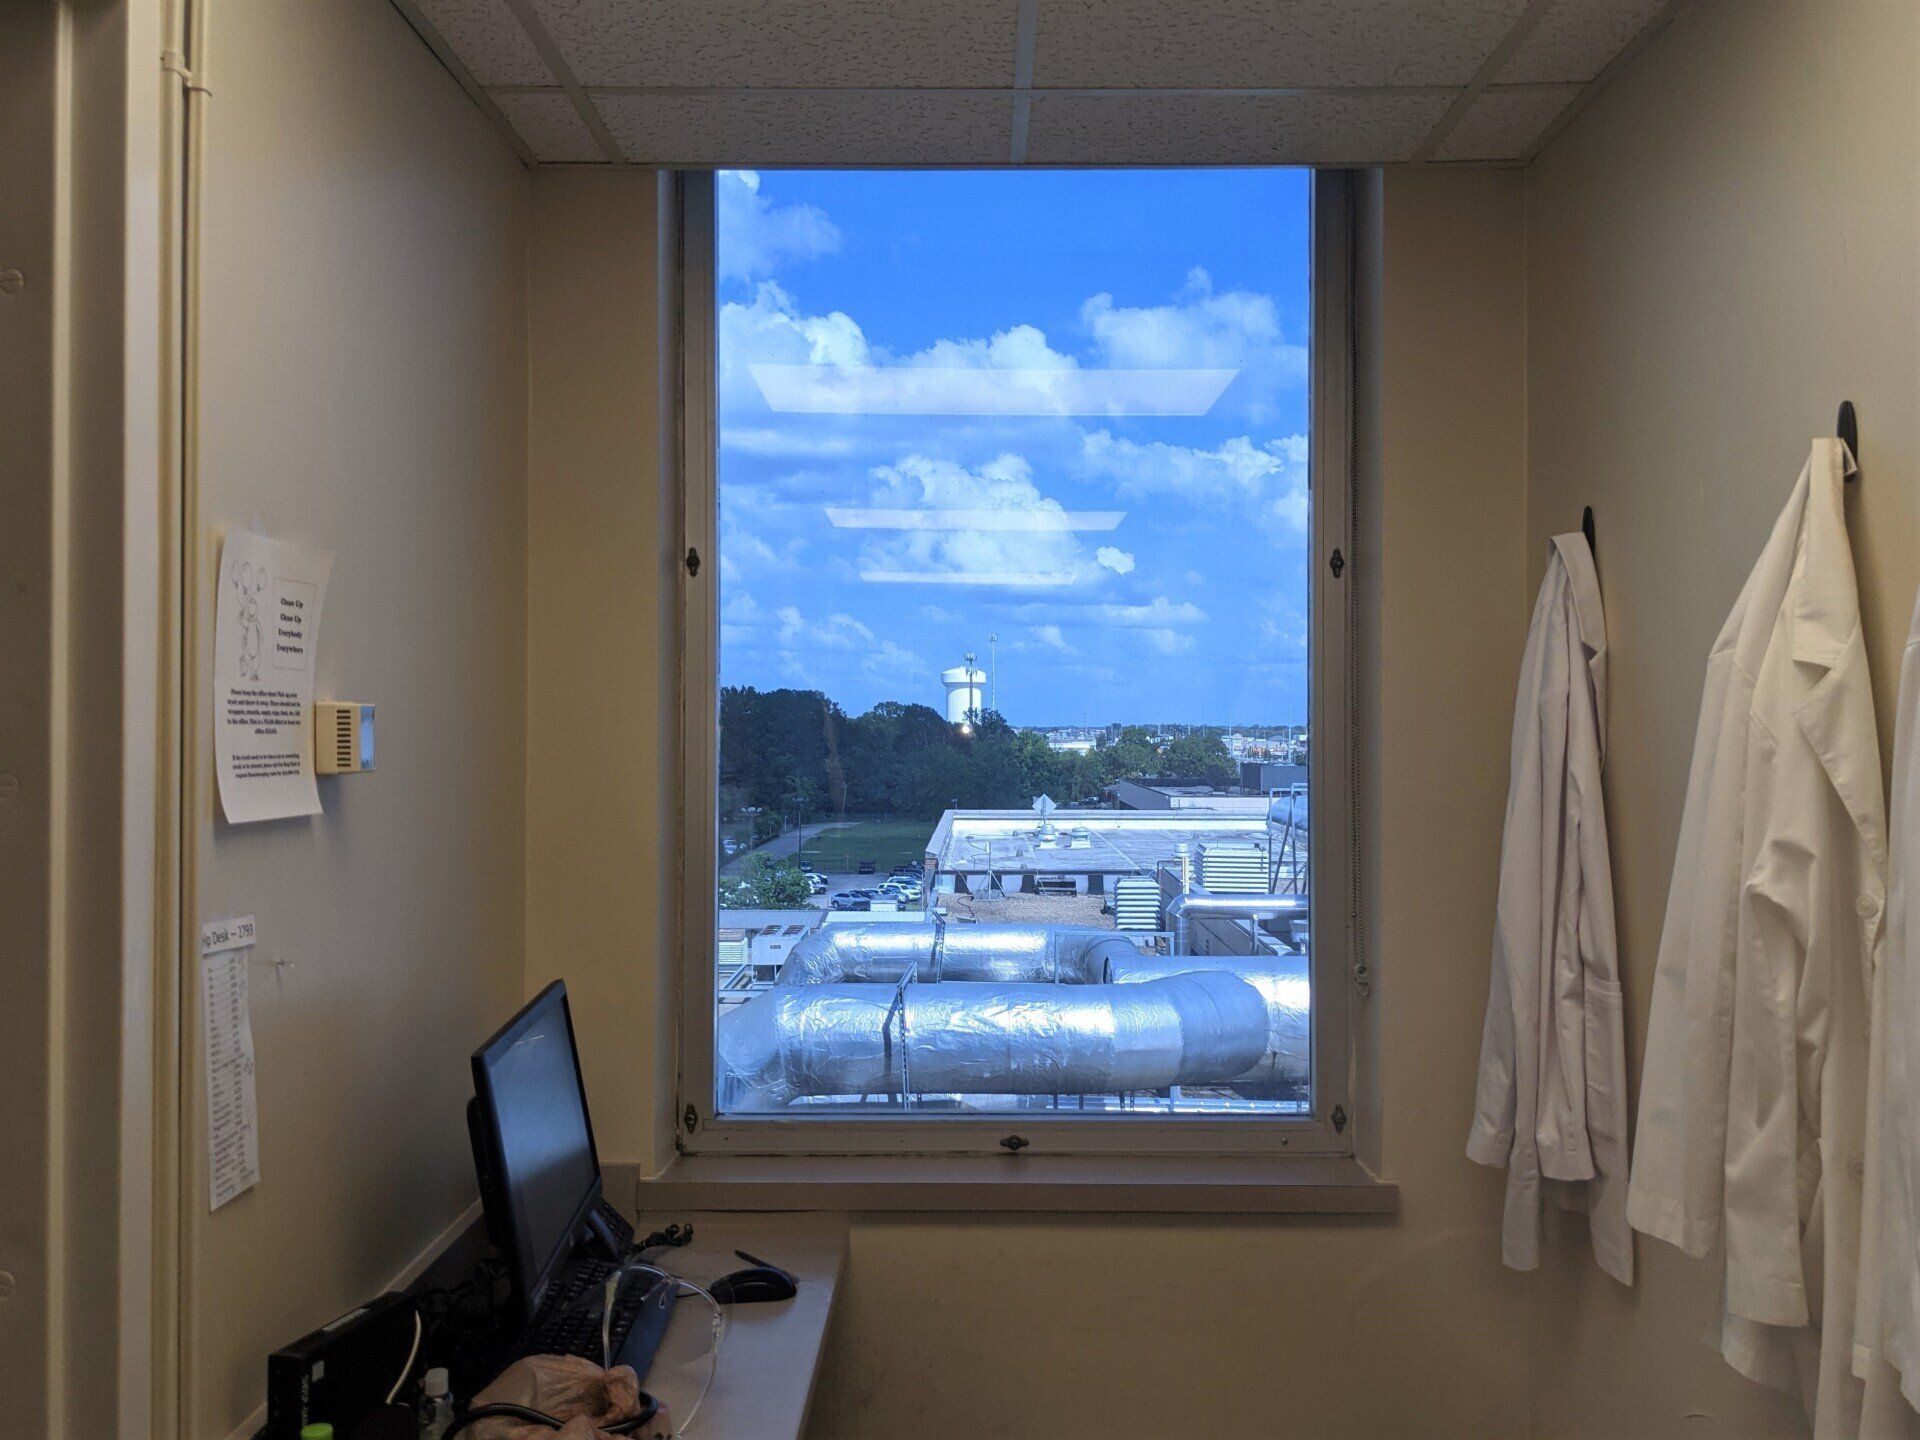 business window tinting in Montgomery AL - Bright Sun Glare Distortion was filtered out by SPF Office Window Tint at Baptist Hospital in Montgomery, AL